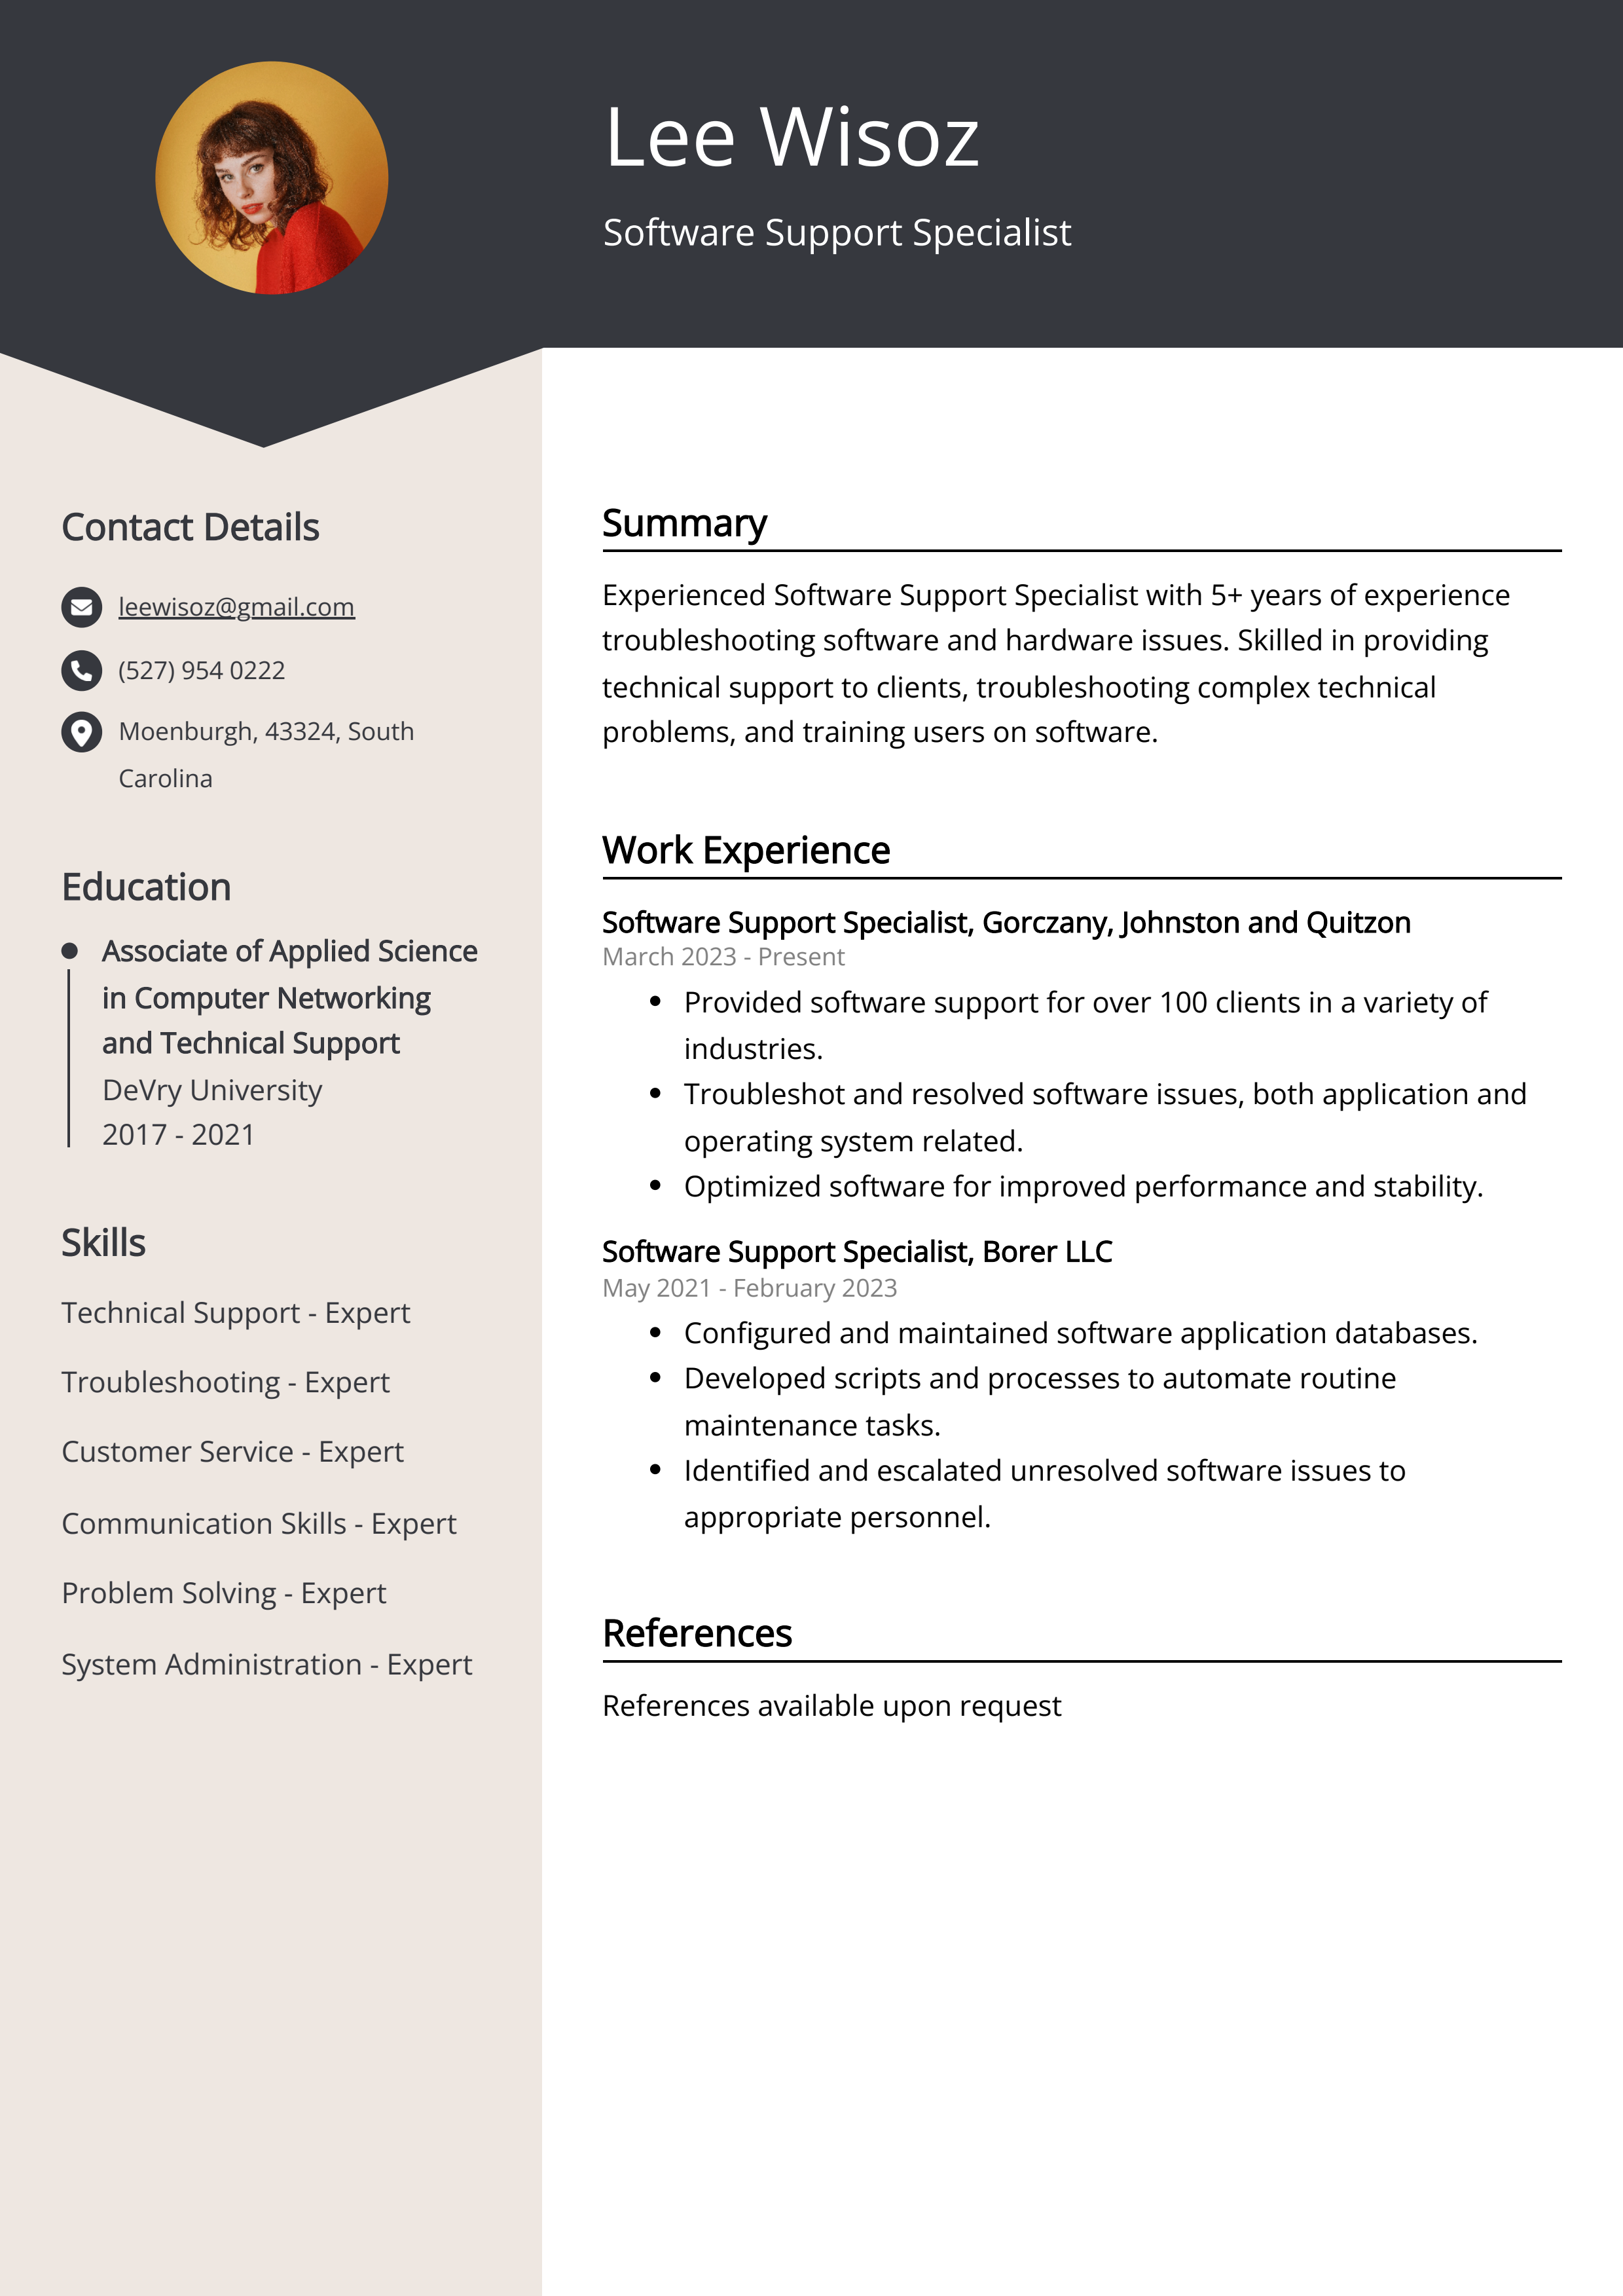 Software Support Specialist CV Example